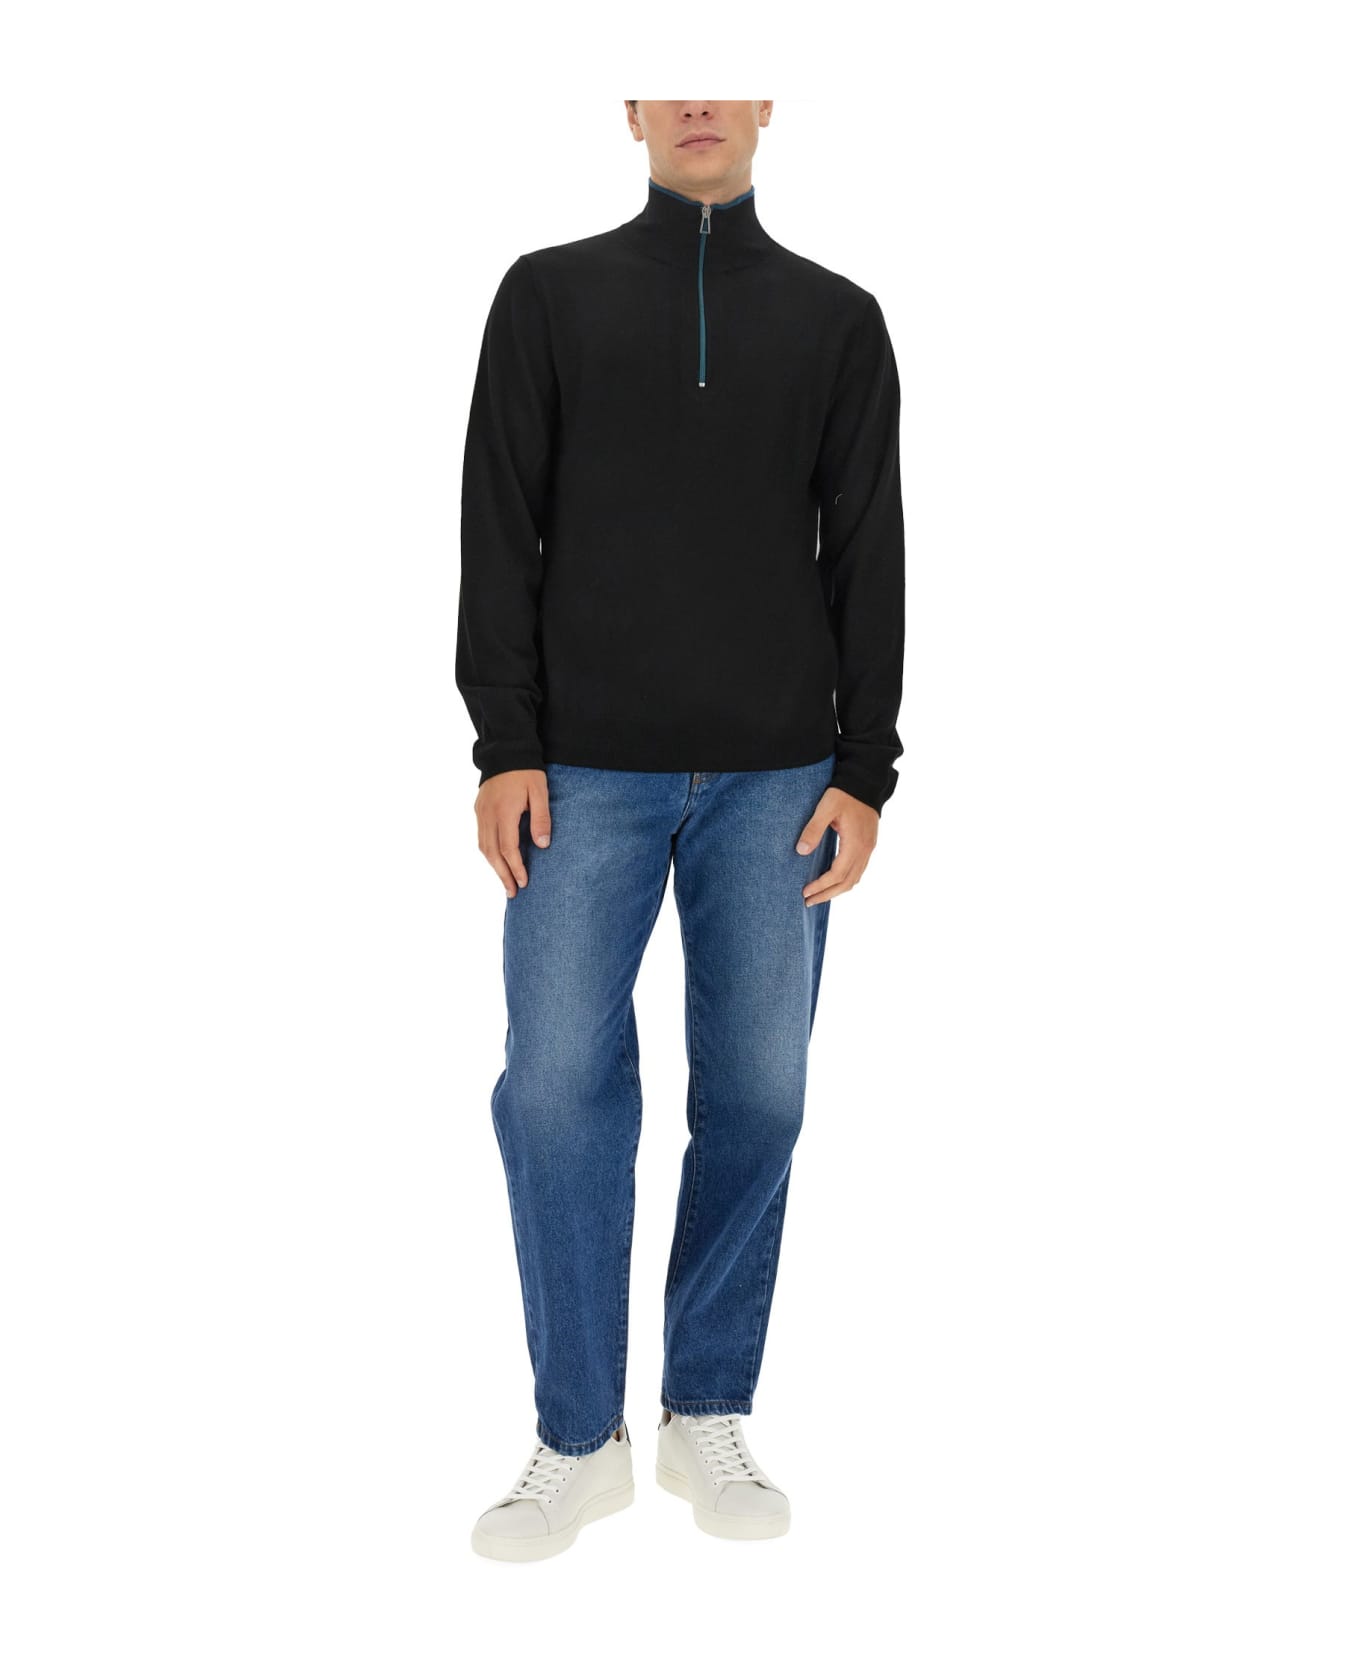 PS by Paul Smith Jersey With Logo Sweater - BLACK